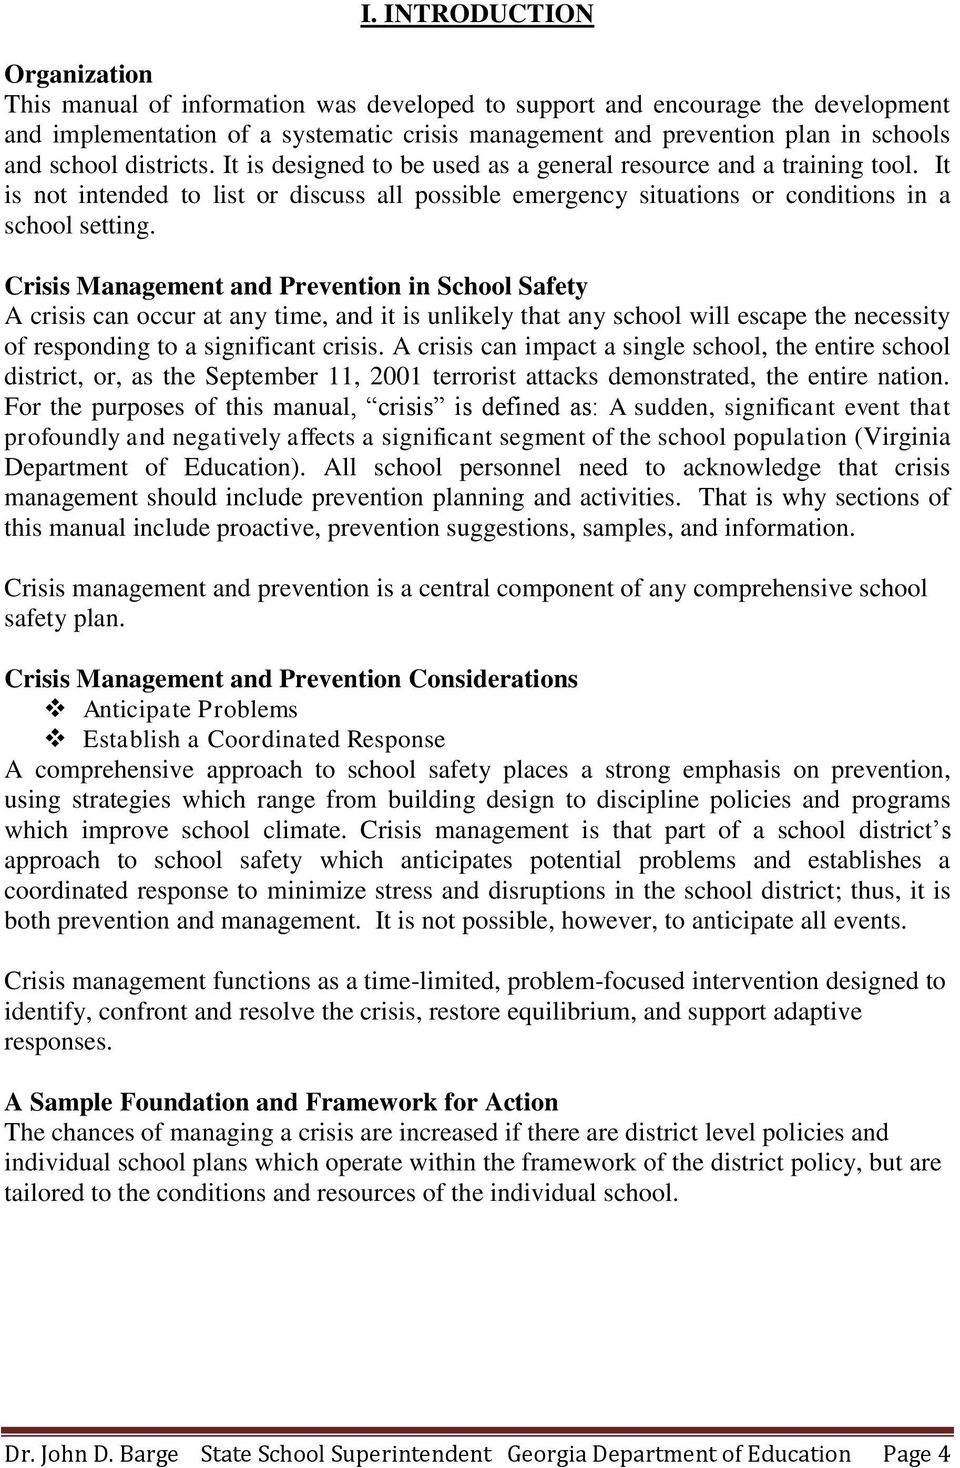 Crisis Management and Prevention in School Safety A crisis can occur at any time, and it is unlikely that any school will escape the necessity of responding to a significant crisis.